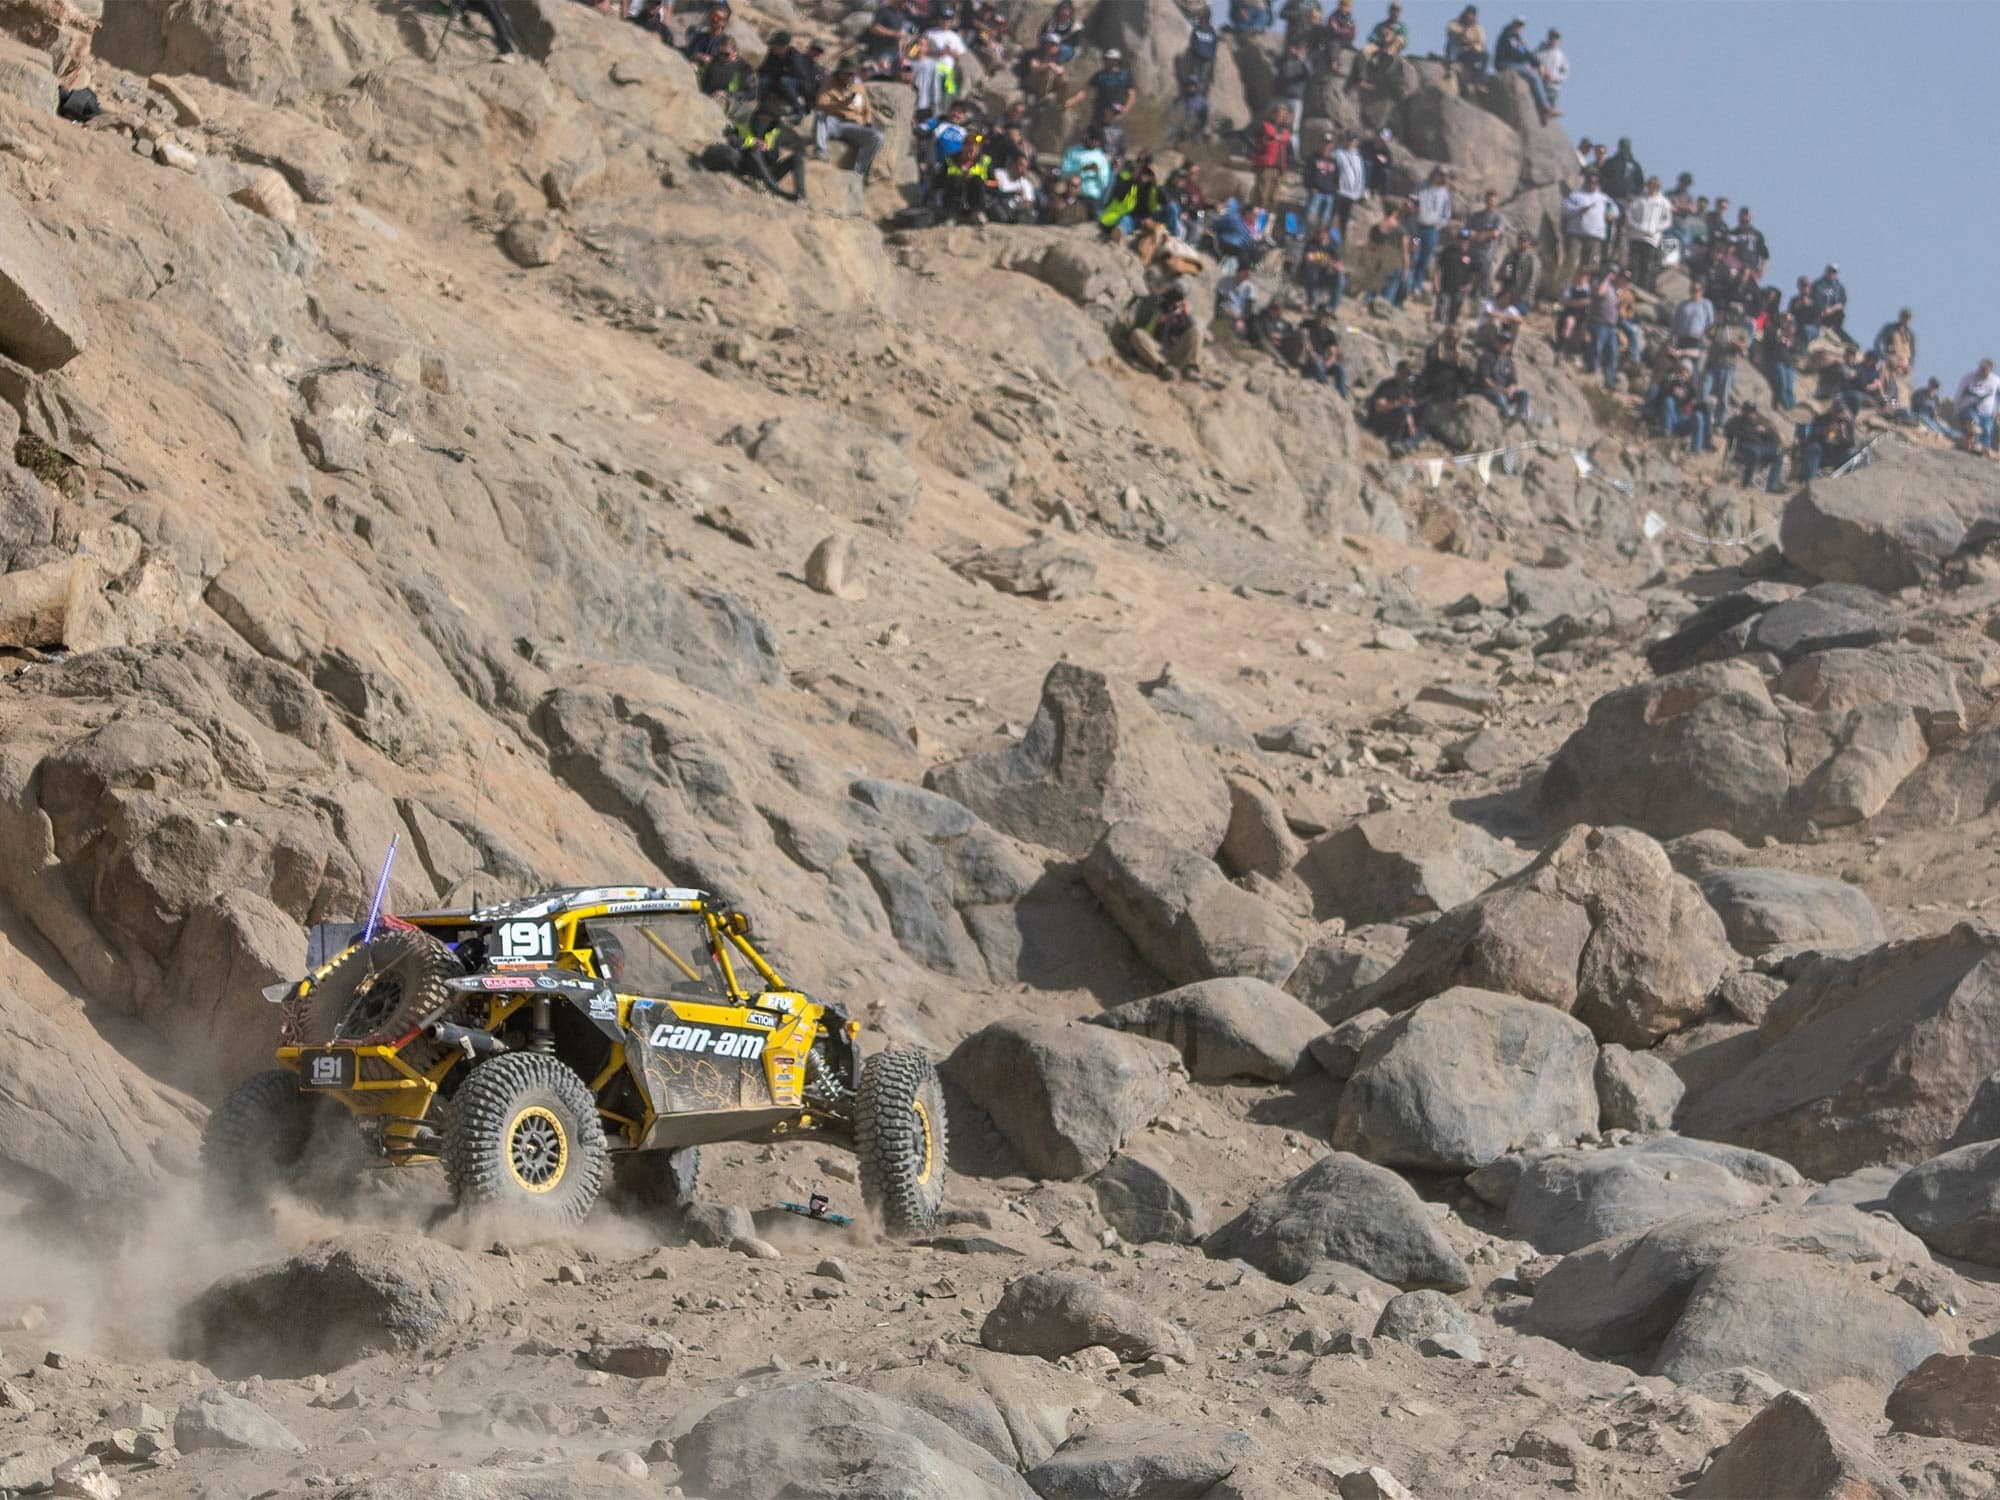 The King of Hammers race rally vehicle on a rocky hillside.